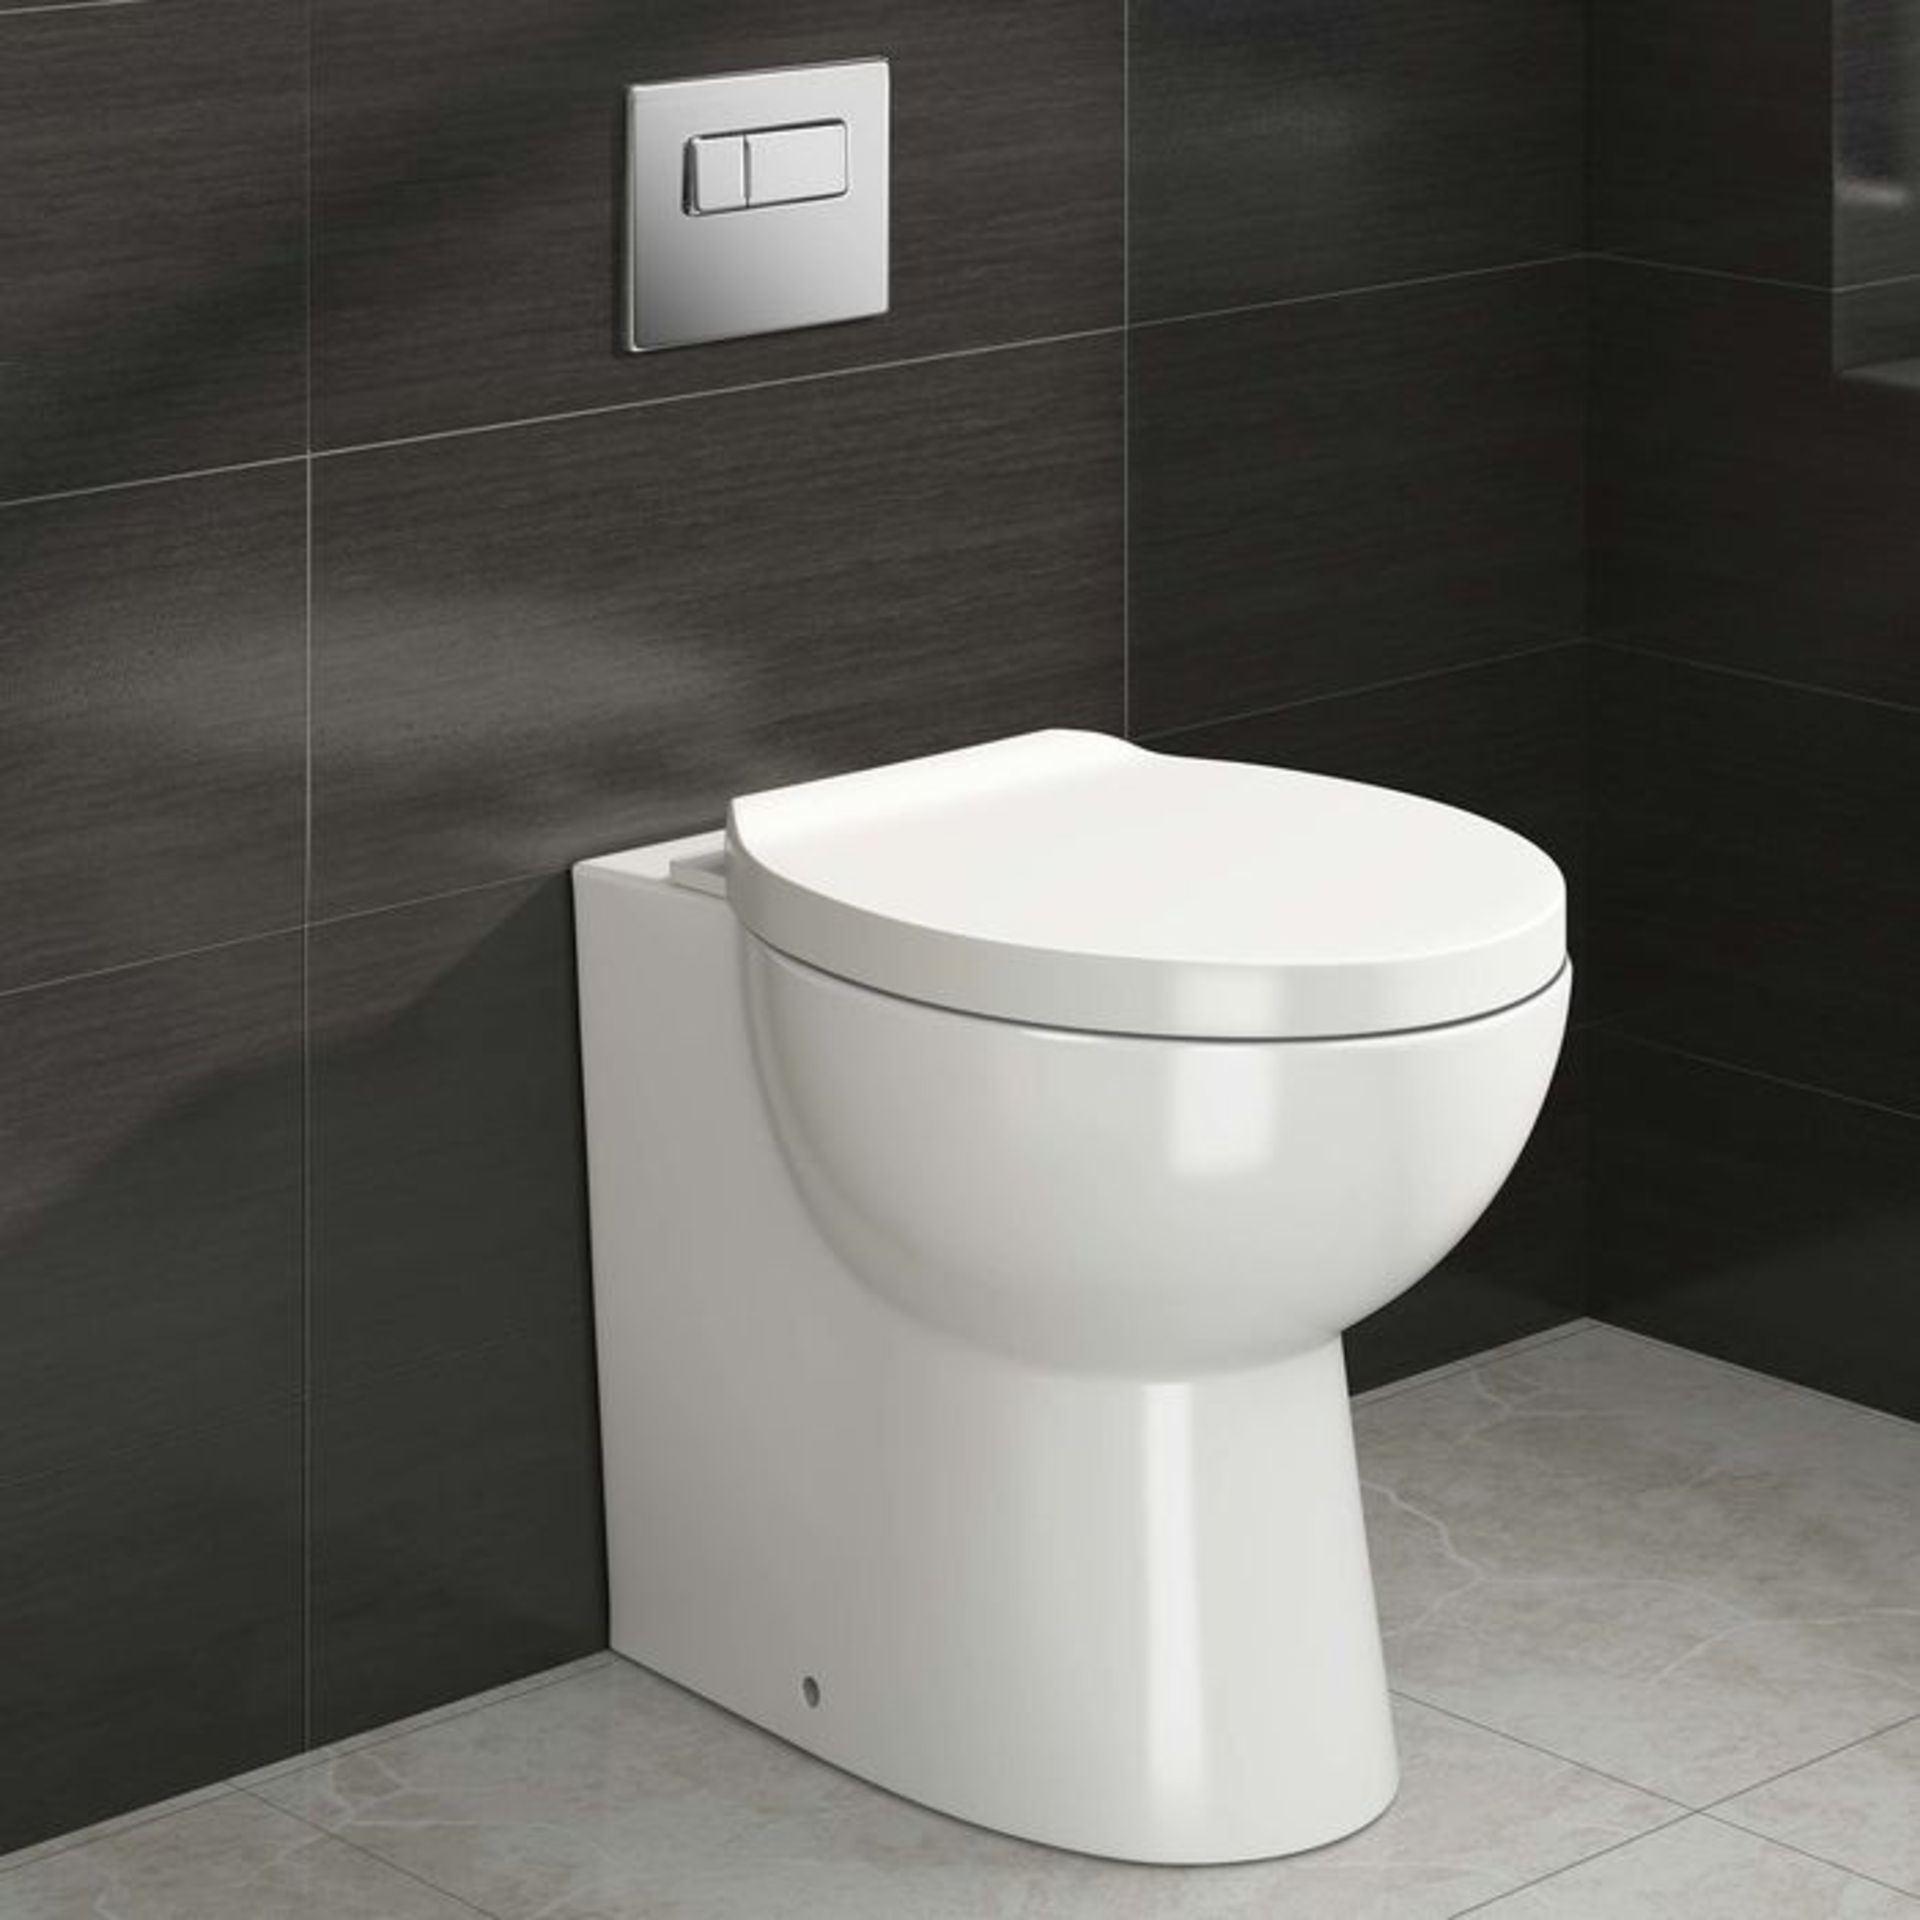 (G163) Crosby Back to Wall Toilet inc Soft Close Seat Made from White Vitreous China Finished in a - Image 3 of 3